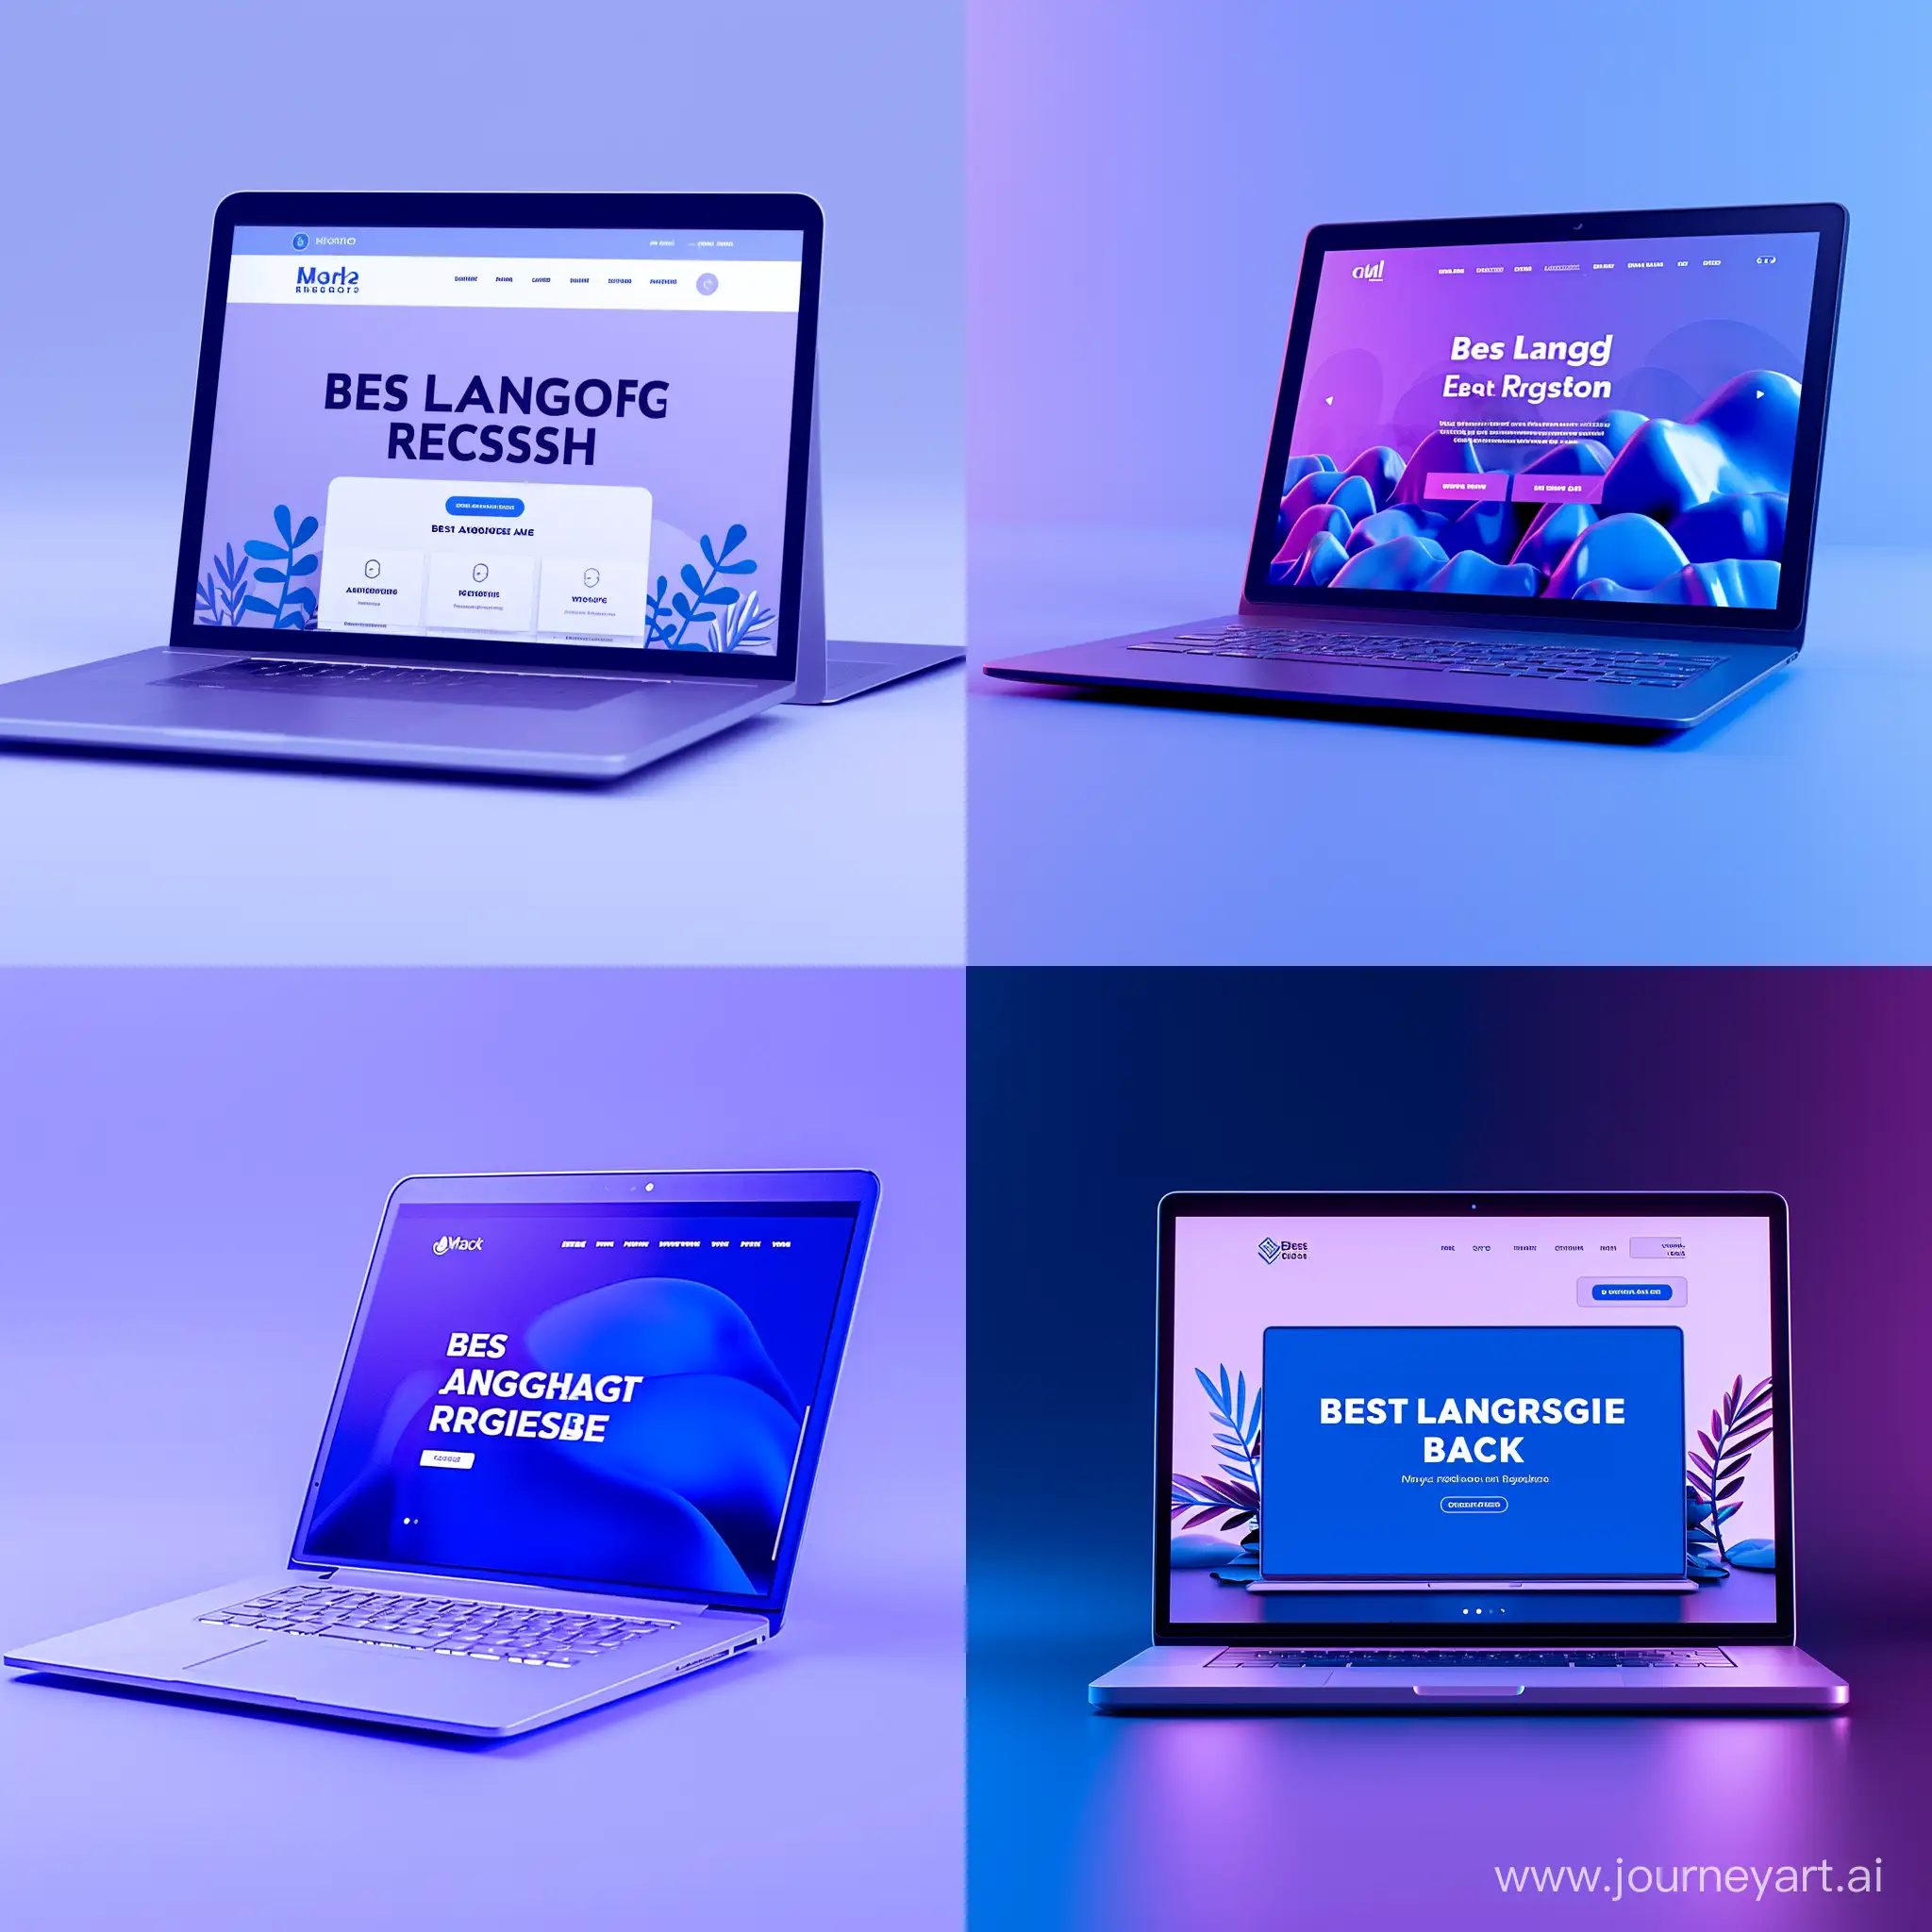 Top-Landing-Page-Resources-Showcased-in-Laptop-Mockup